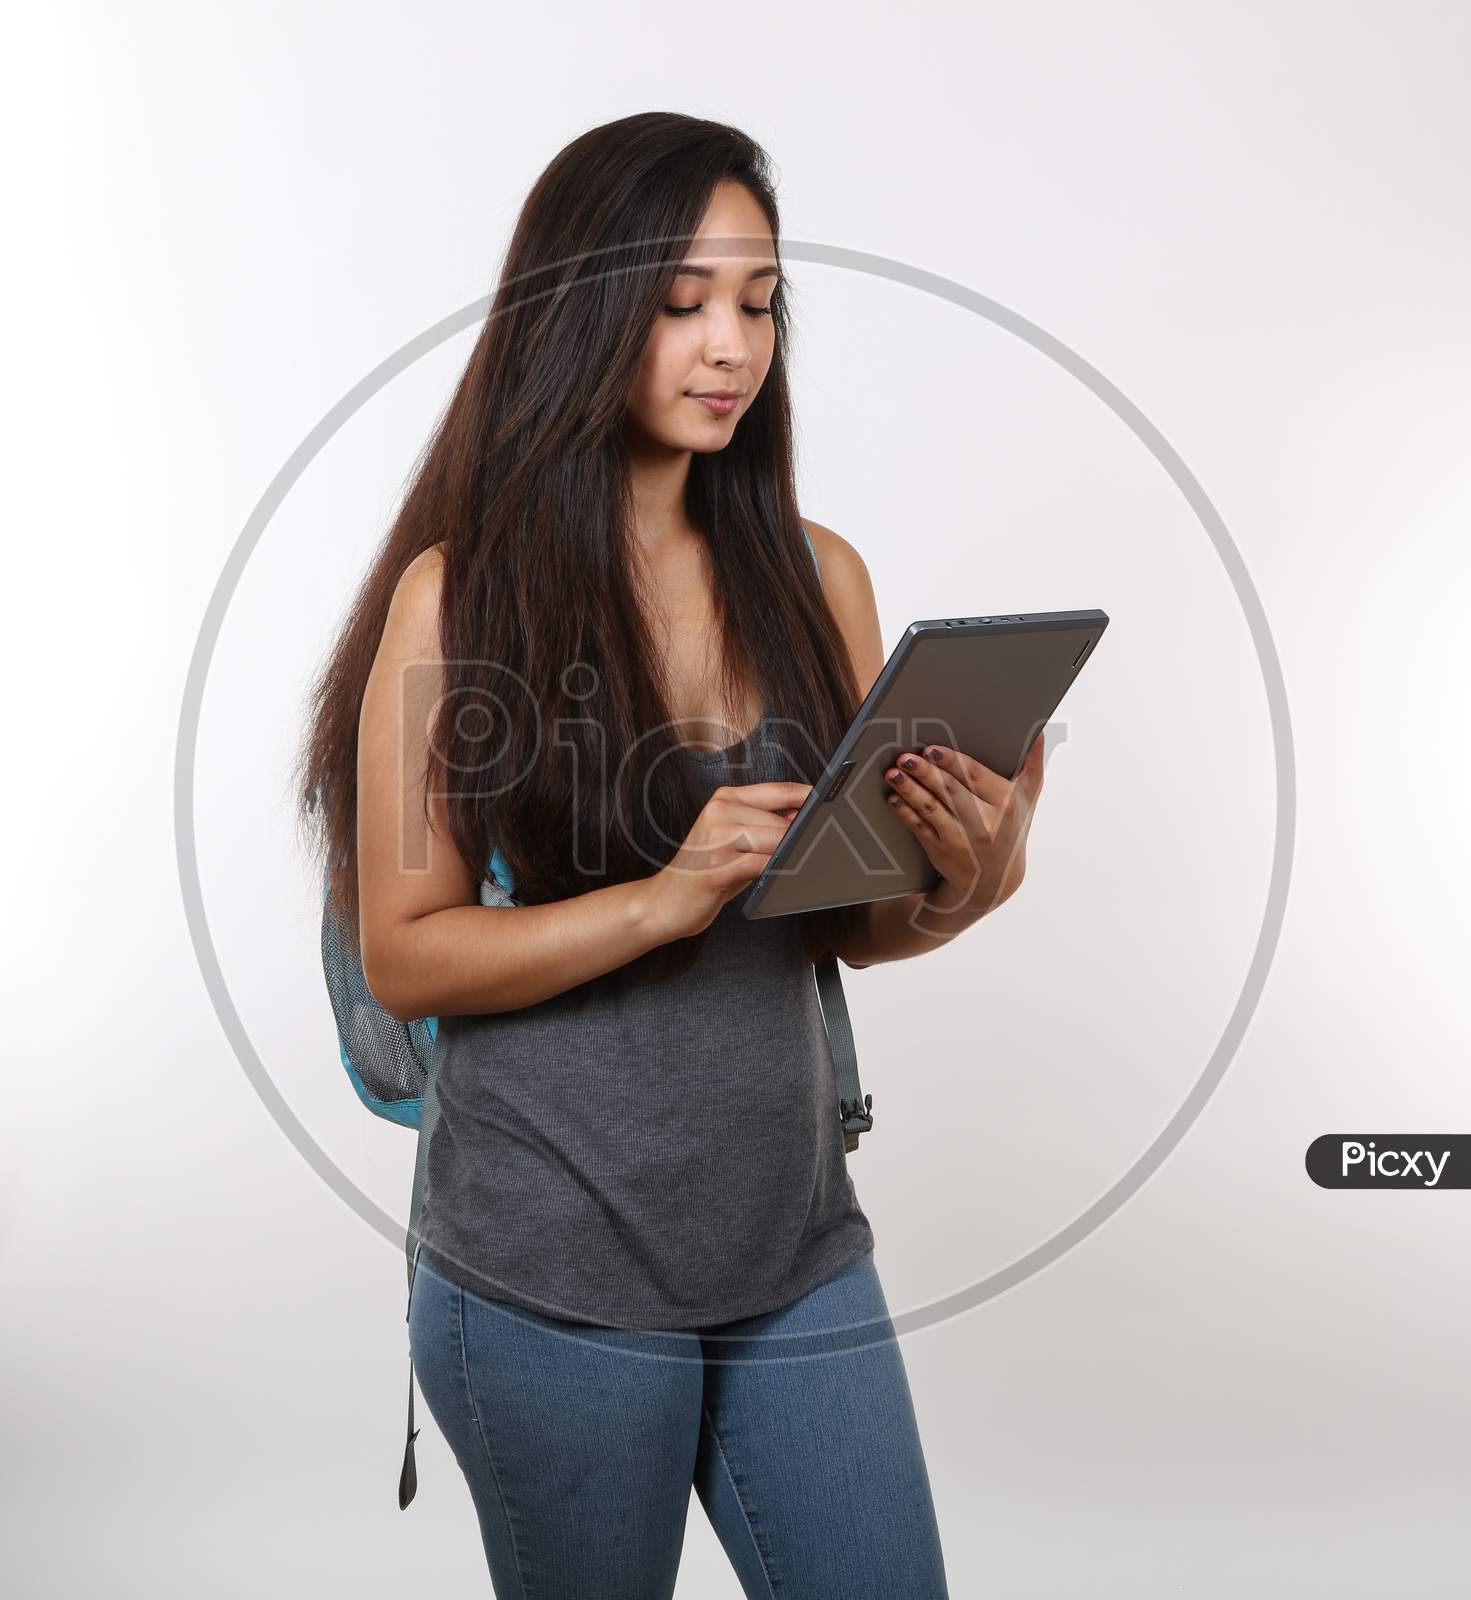 A Young Female Student In Jeans Views Her Tablet As She Holds Her Backpack.